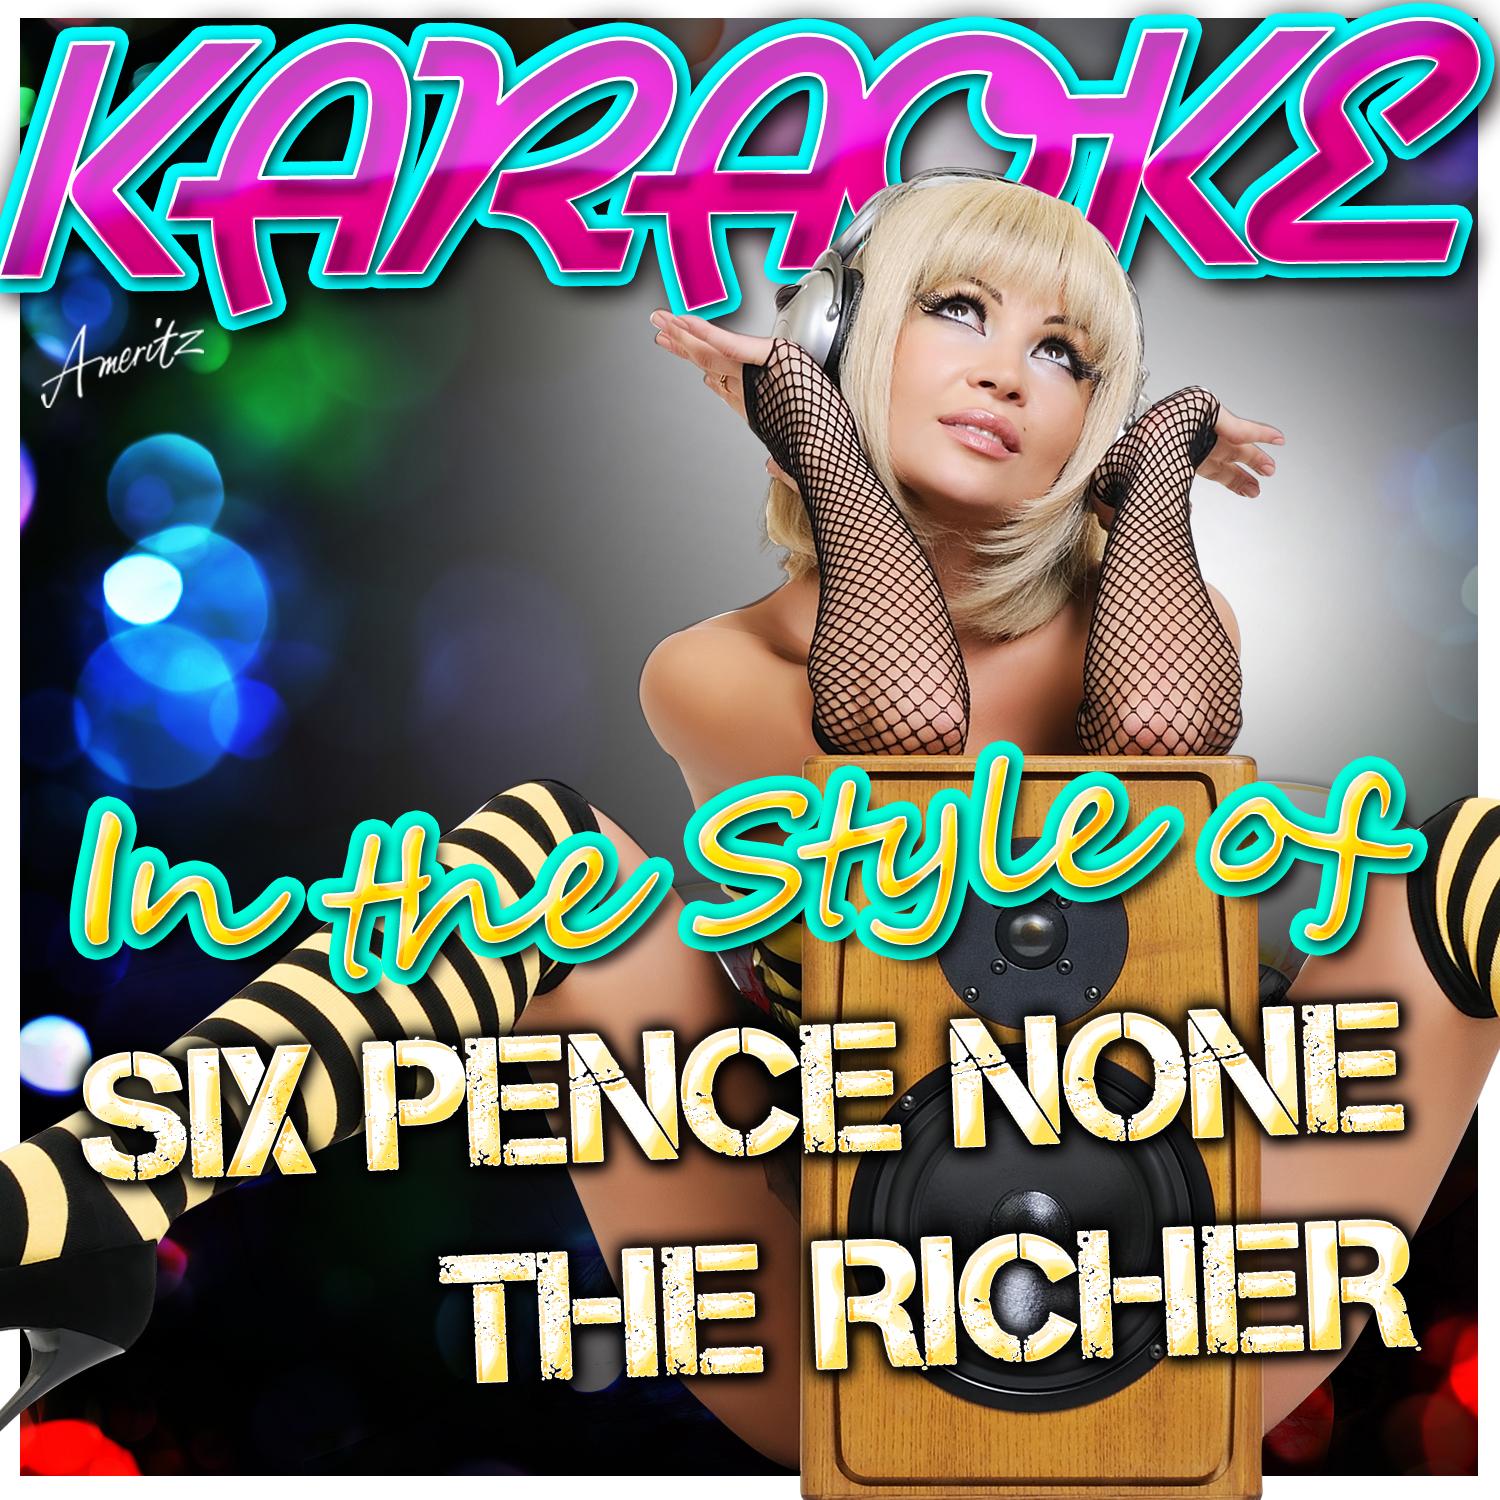 There She Goes (In the Style of Sixpence None the Richer) [Karaoke Version]